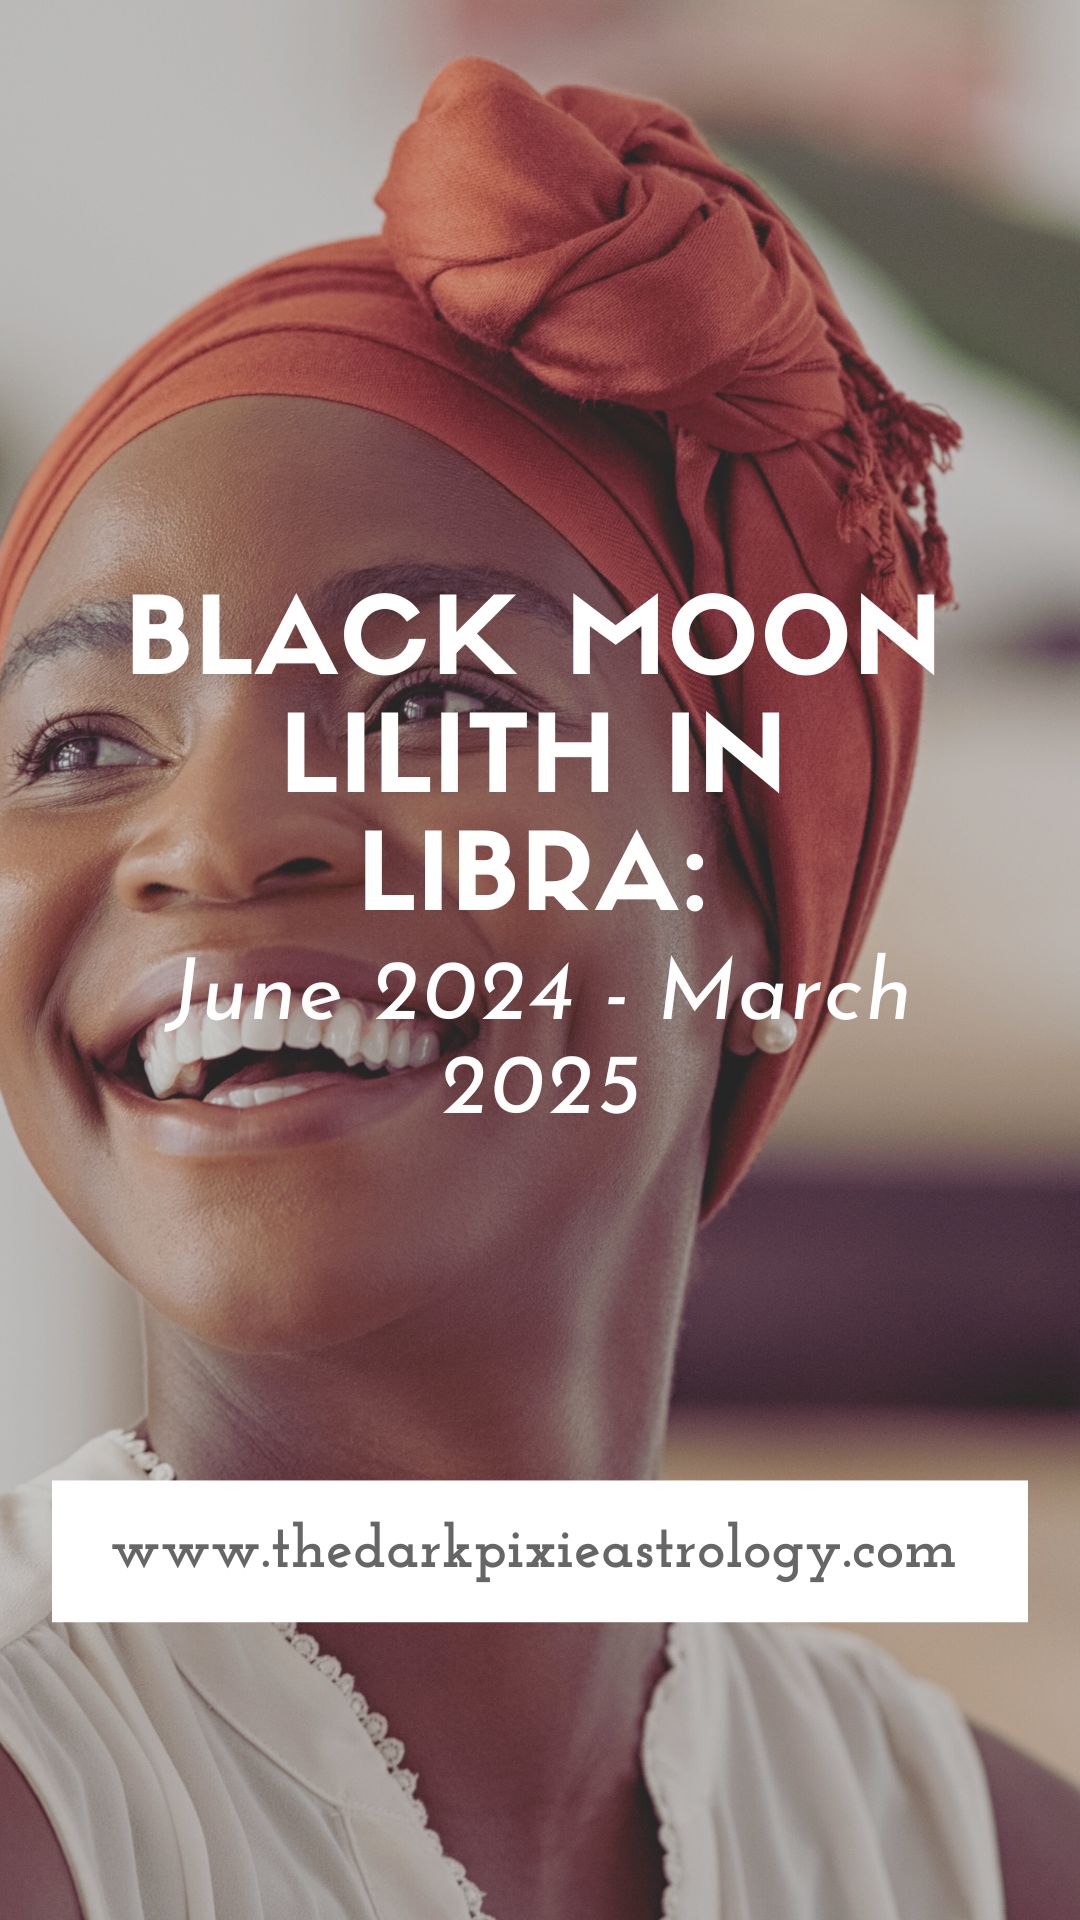 Black Moon Lilith in Libra: June 2024 - March 2025 - The Dark Pixie Astrology